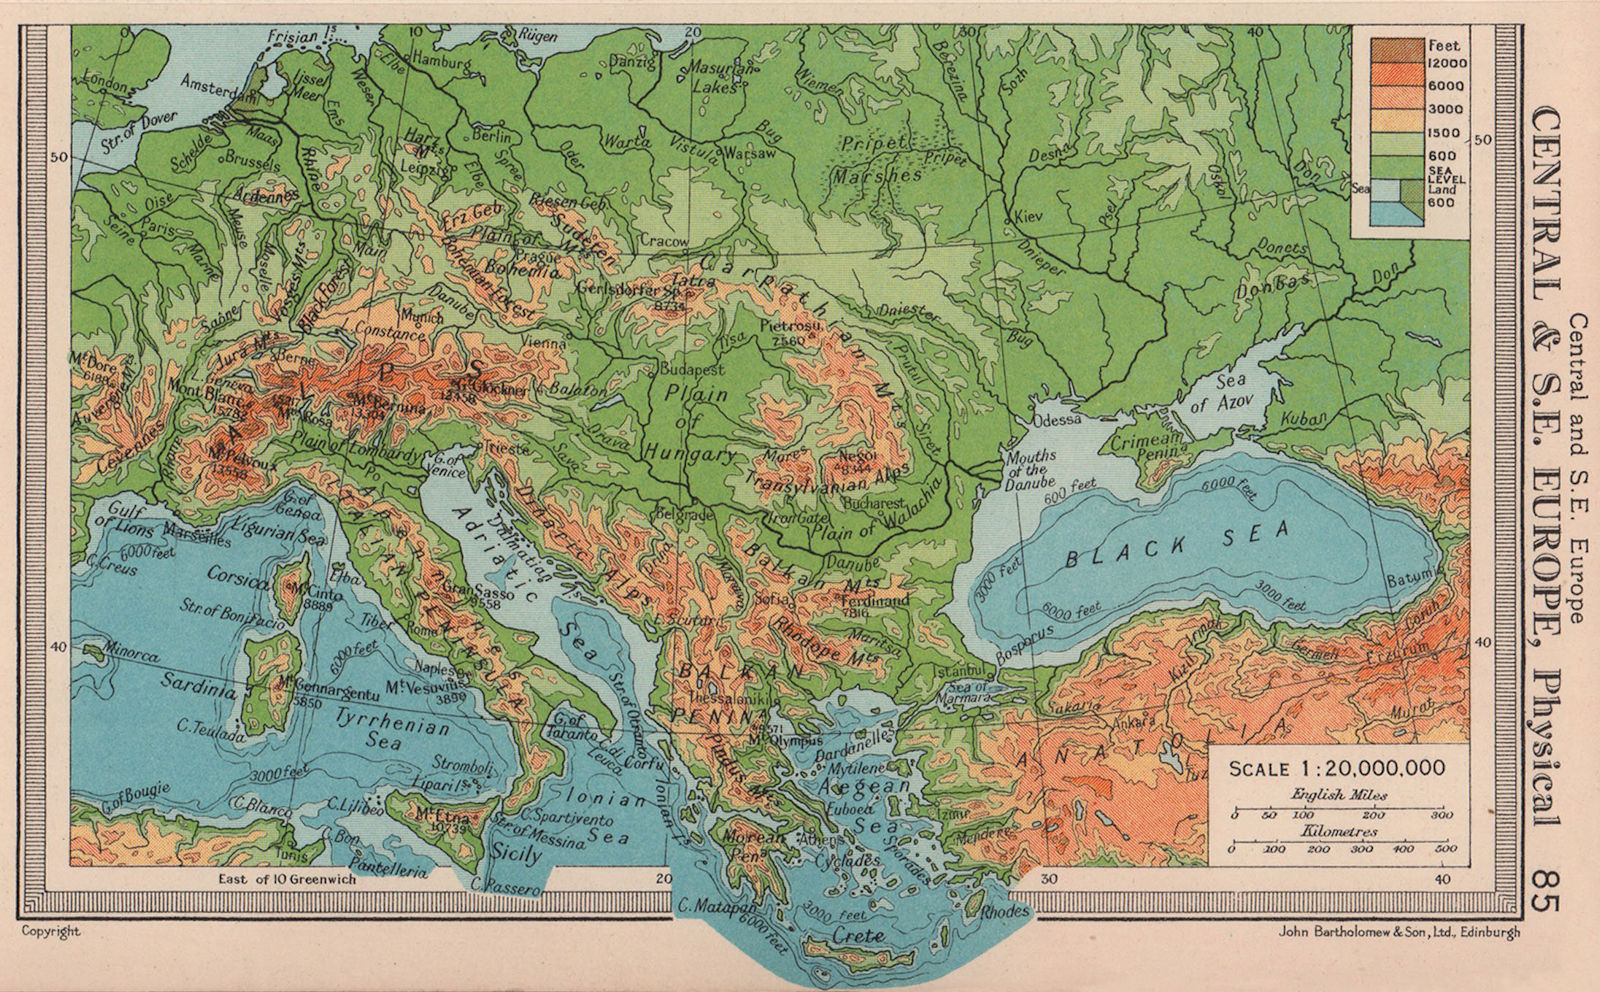 Associate Product Central & South East Europe - Physical. BARTHOLOMEW 1949 old vintage map chart